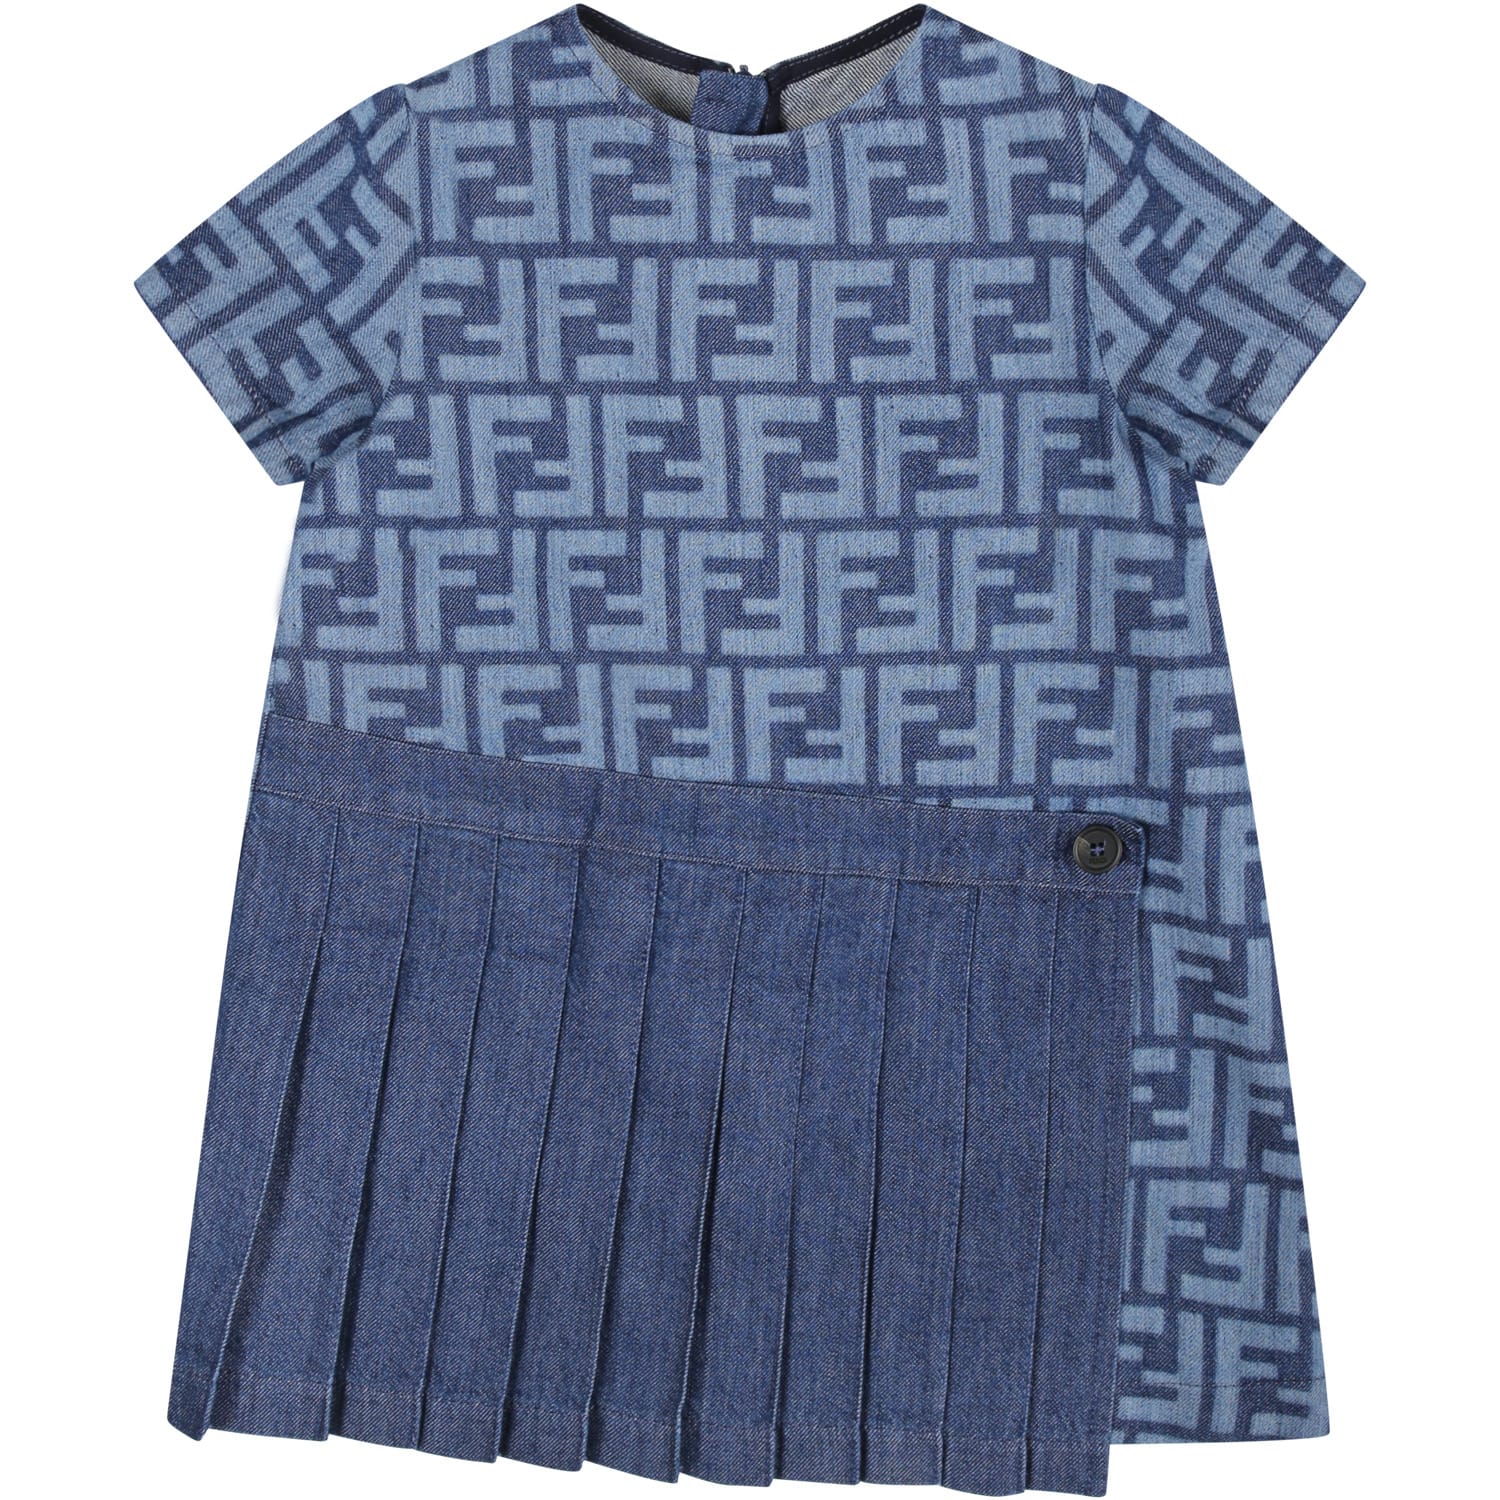 Fendi Kids' Denim Dress For Baby Girl With All-over Iconic Ff